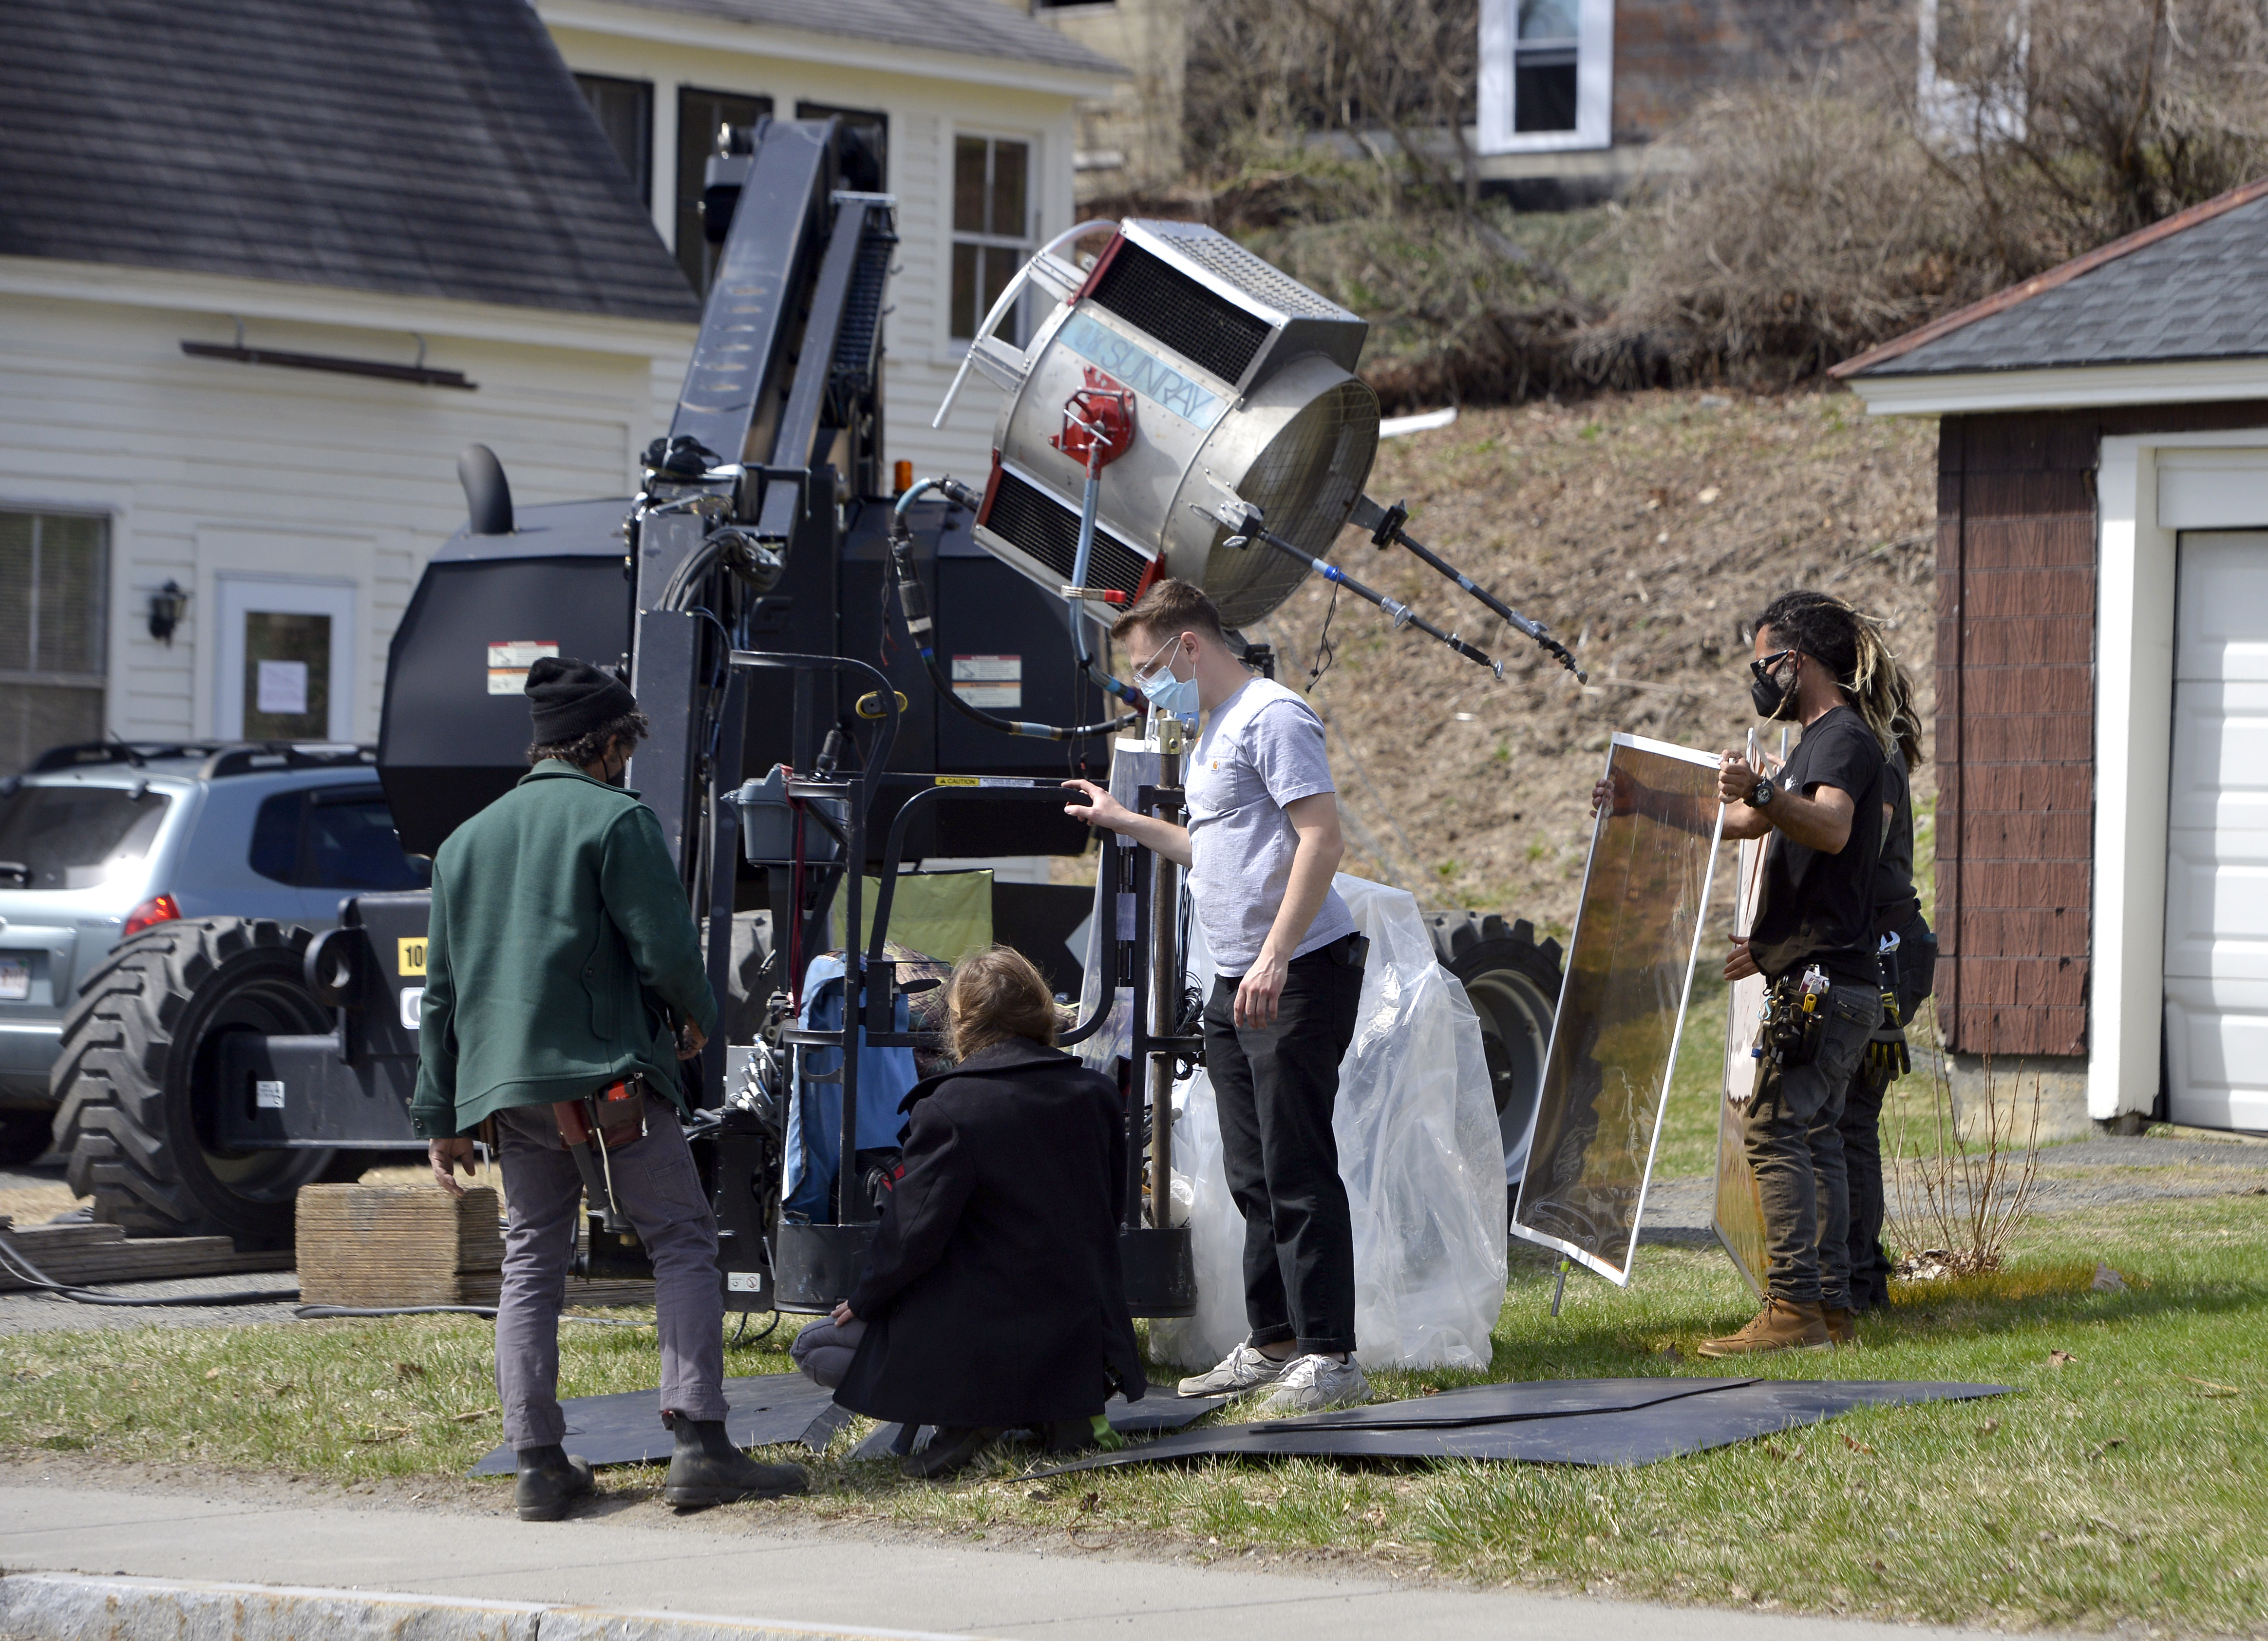 Crew members work on lighting equipment along State Street in Shelburne Falls as an episode of the show Dexter is filmed in town, April 7, 2021.   (Don Treeger / The Republican)